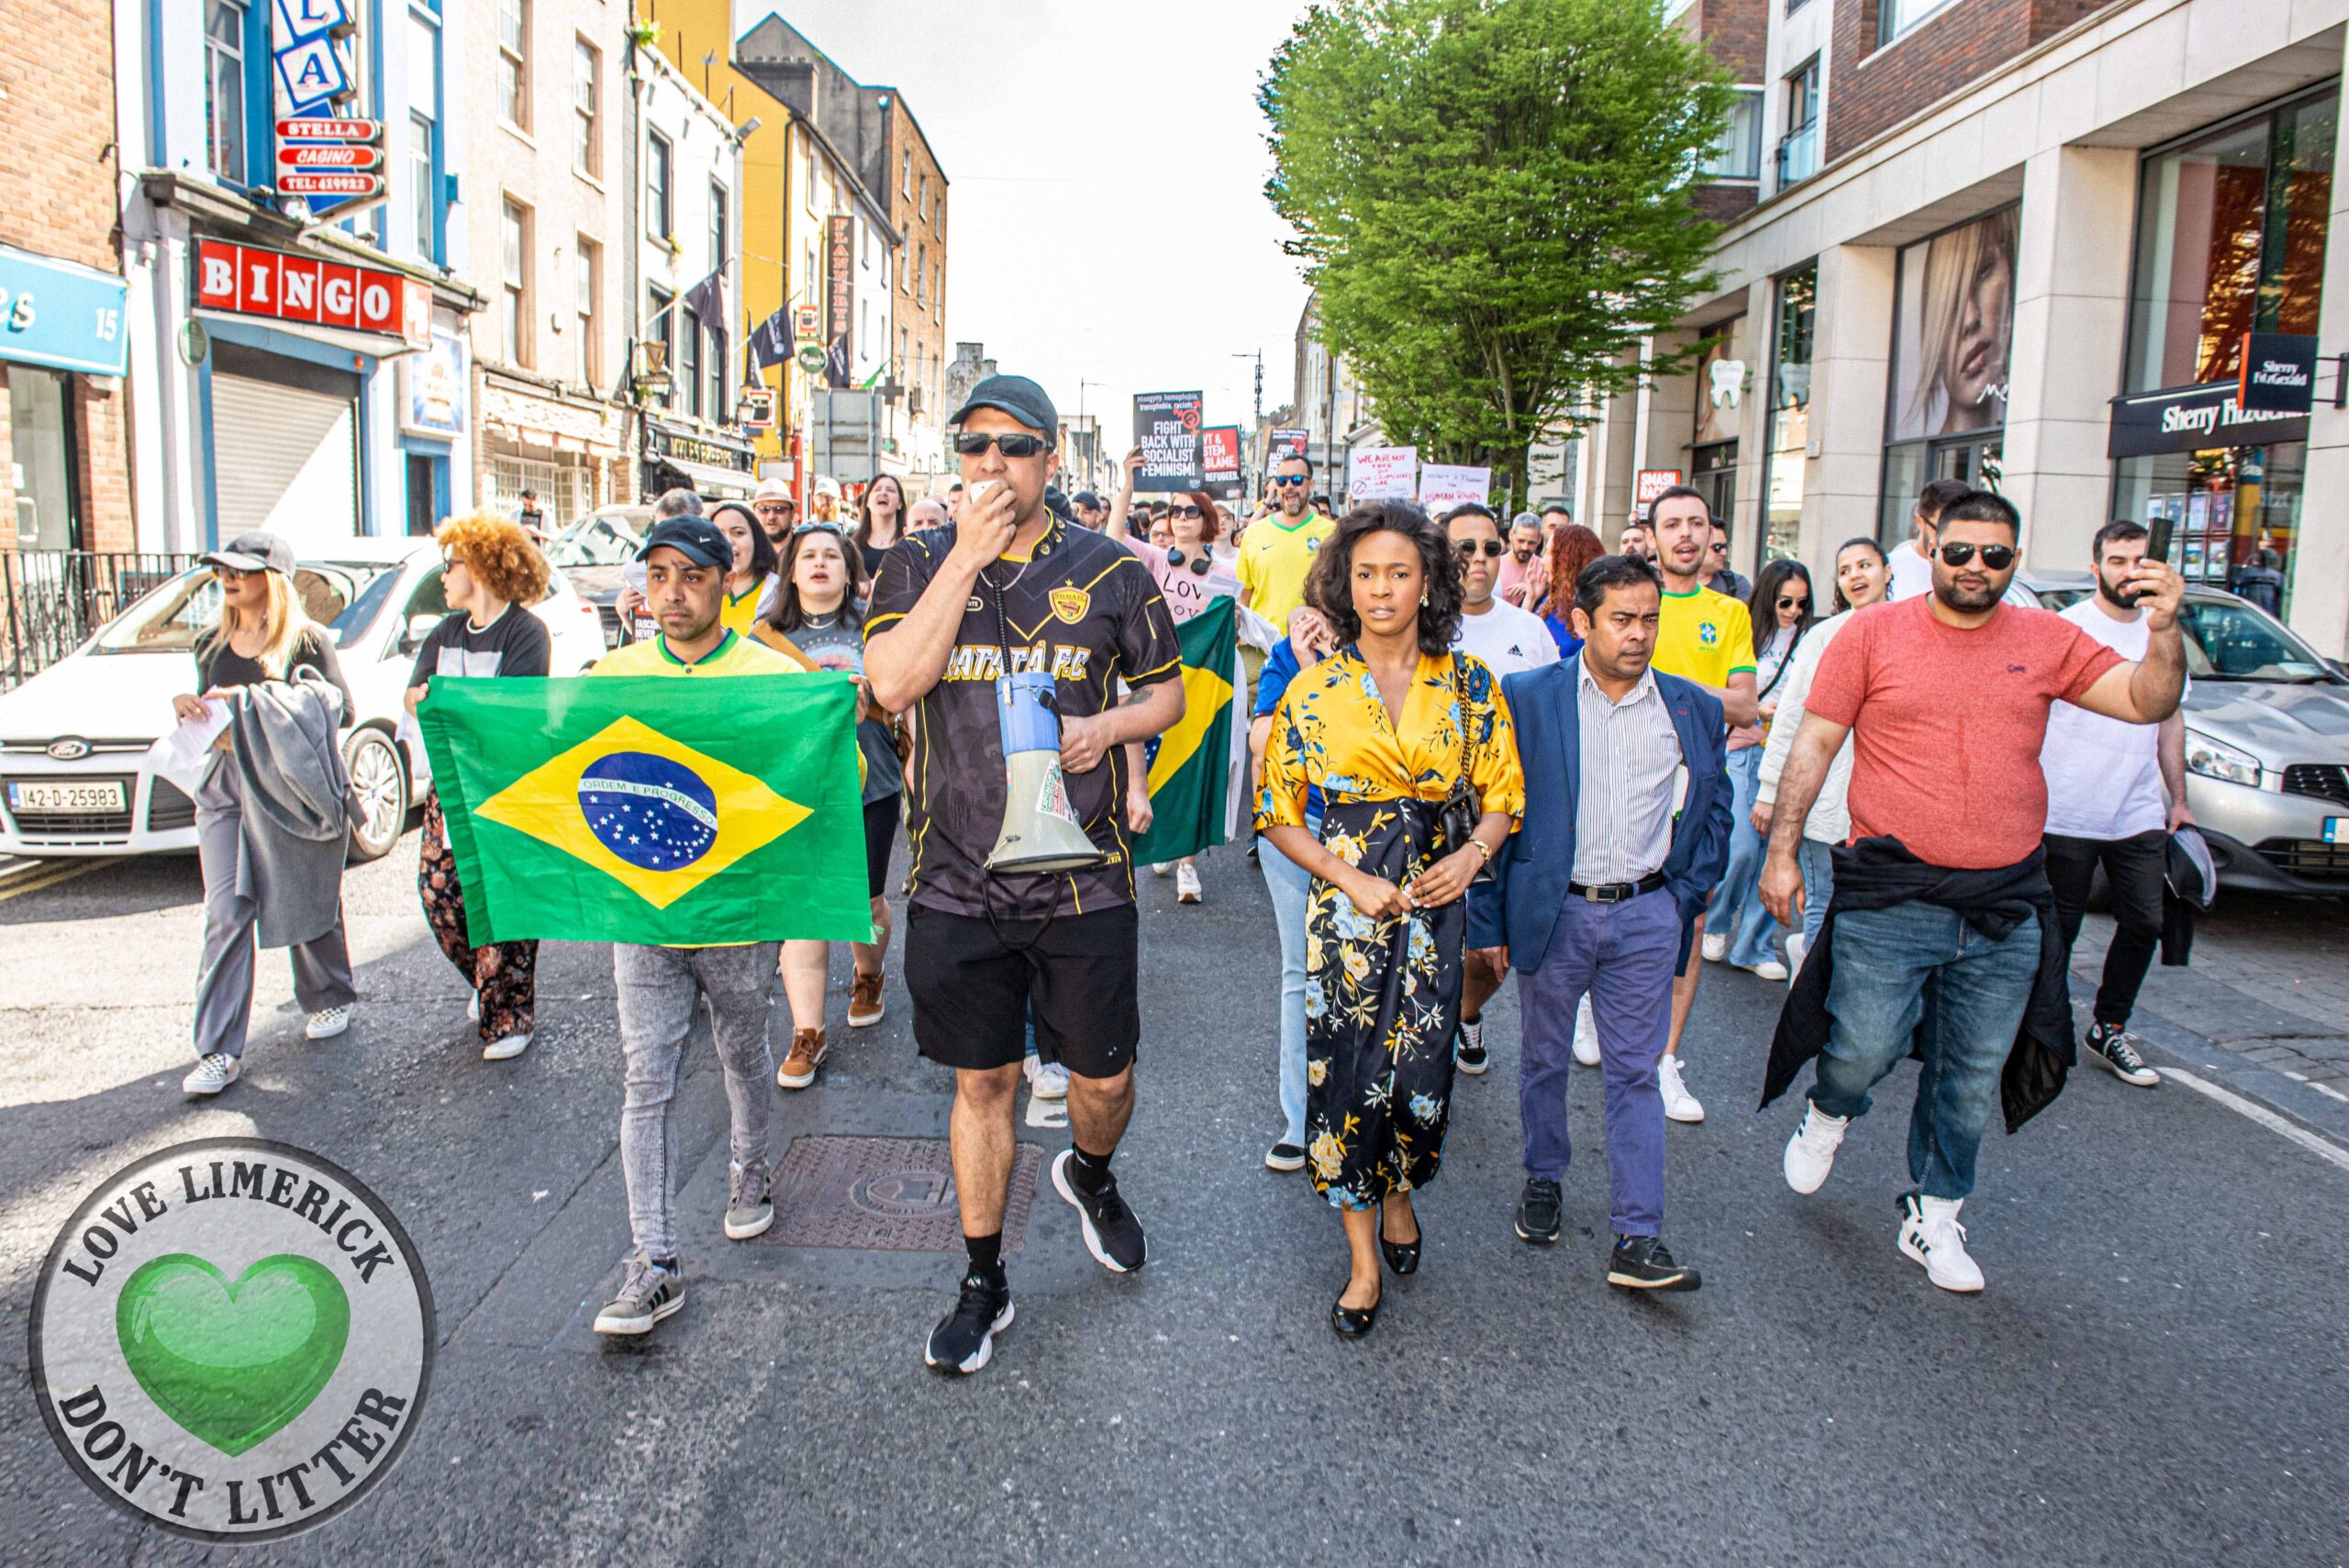 A crowd of more than 200 people gathered in Limerick City on Sunday, April 21, to show their solidarity with all communities in Limerick and across the country, spreading their message that xenophobia is not welcome. PIcture: Olena Oleksienko/ilovelimerick